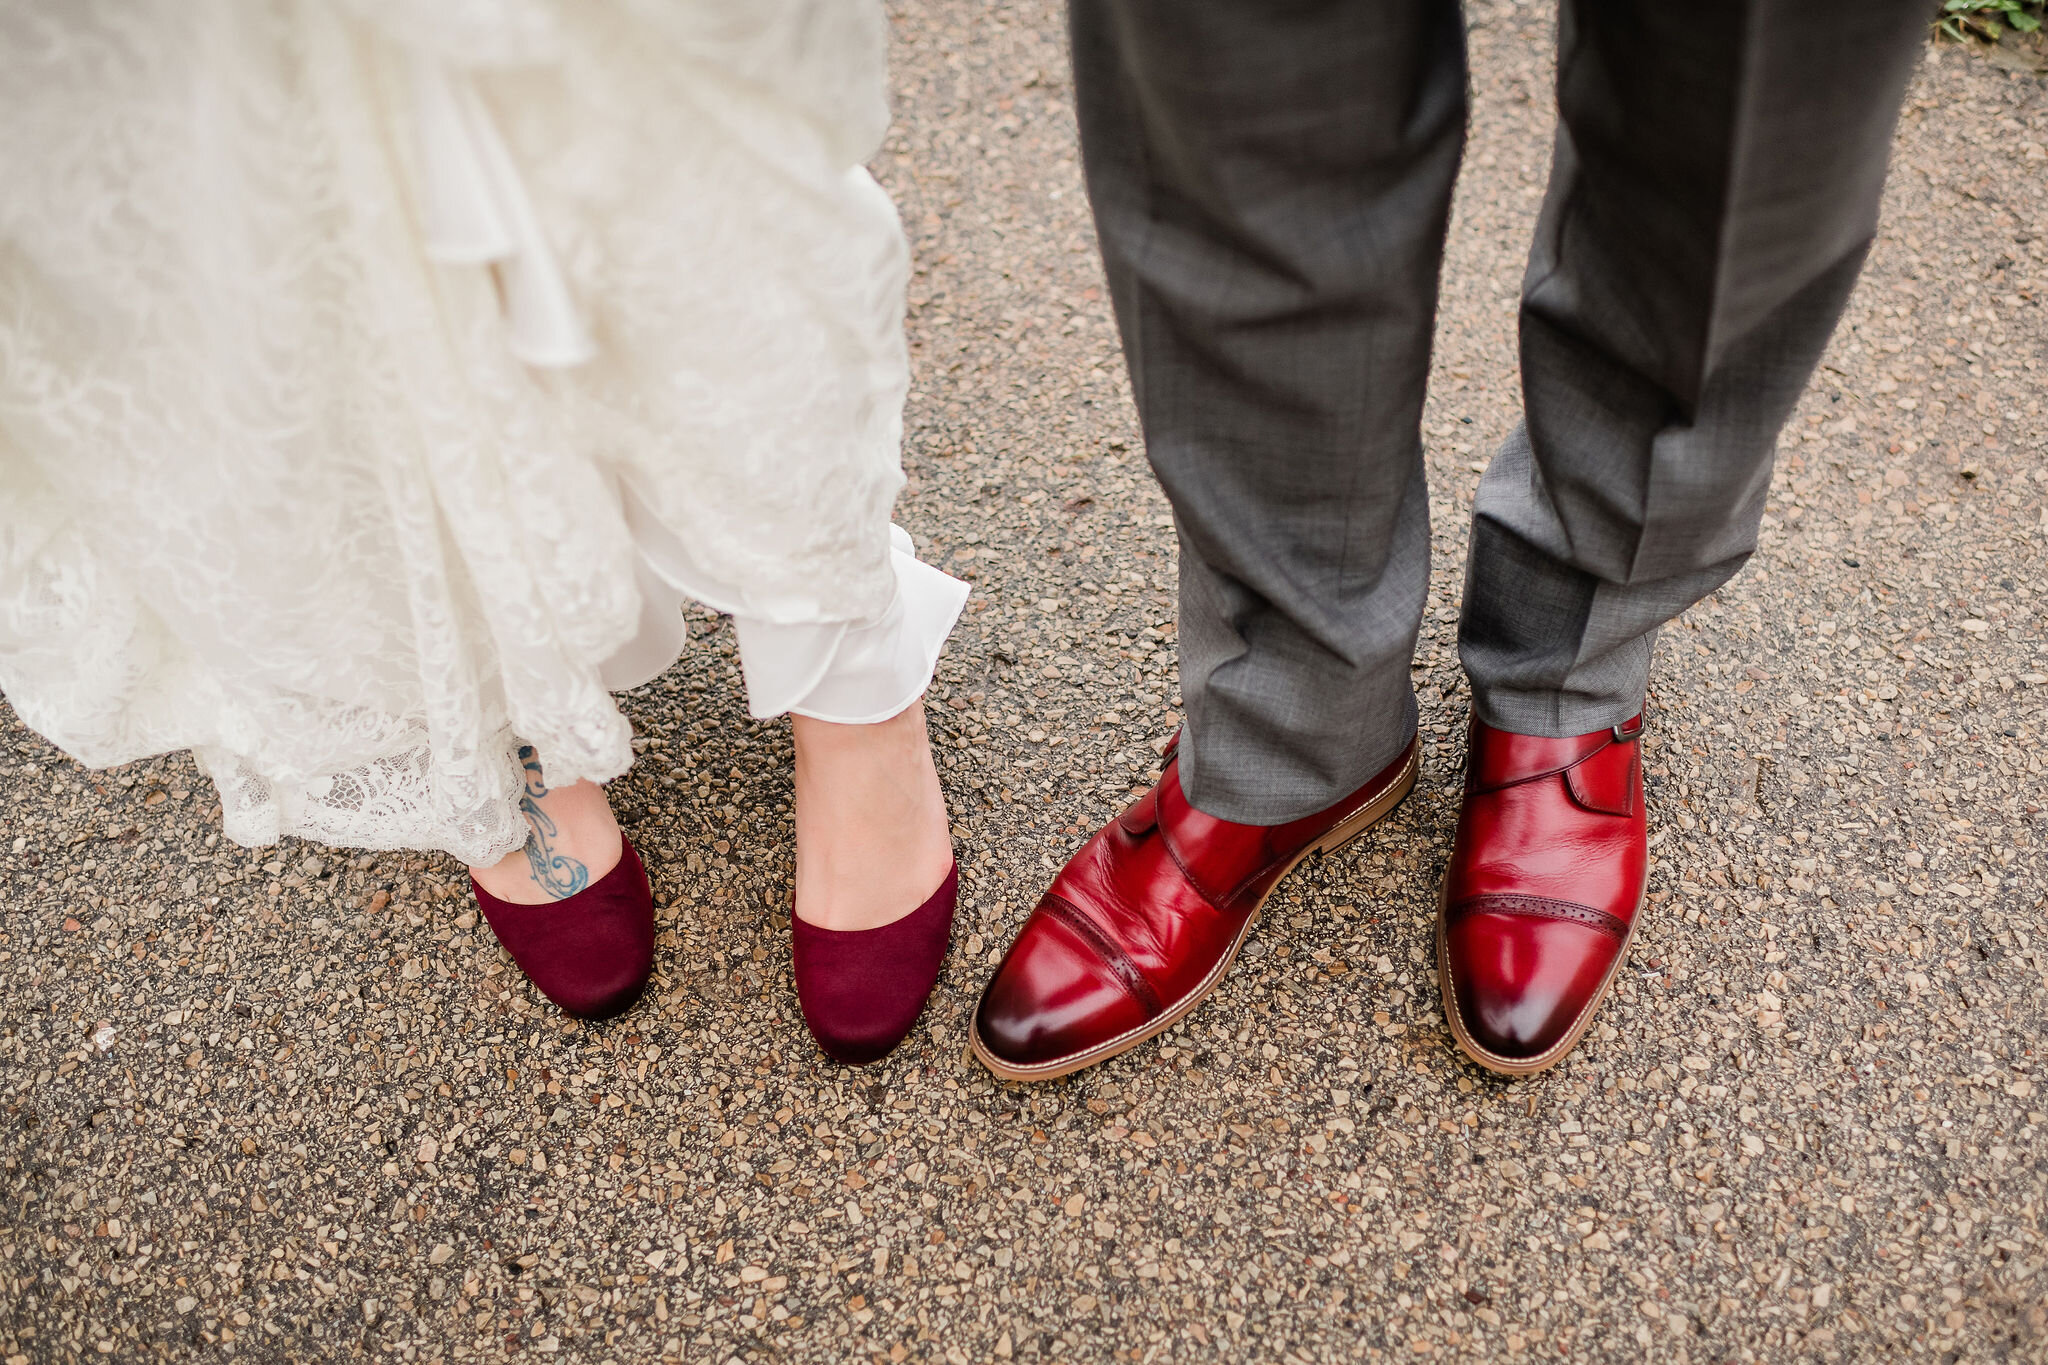 Bride and groom's wet shoes